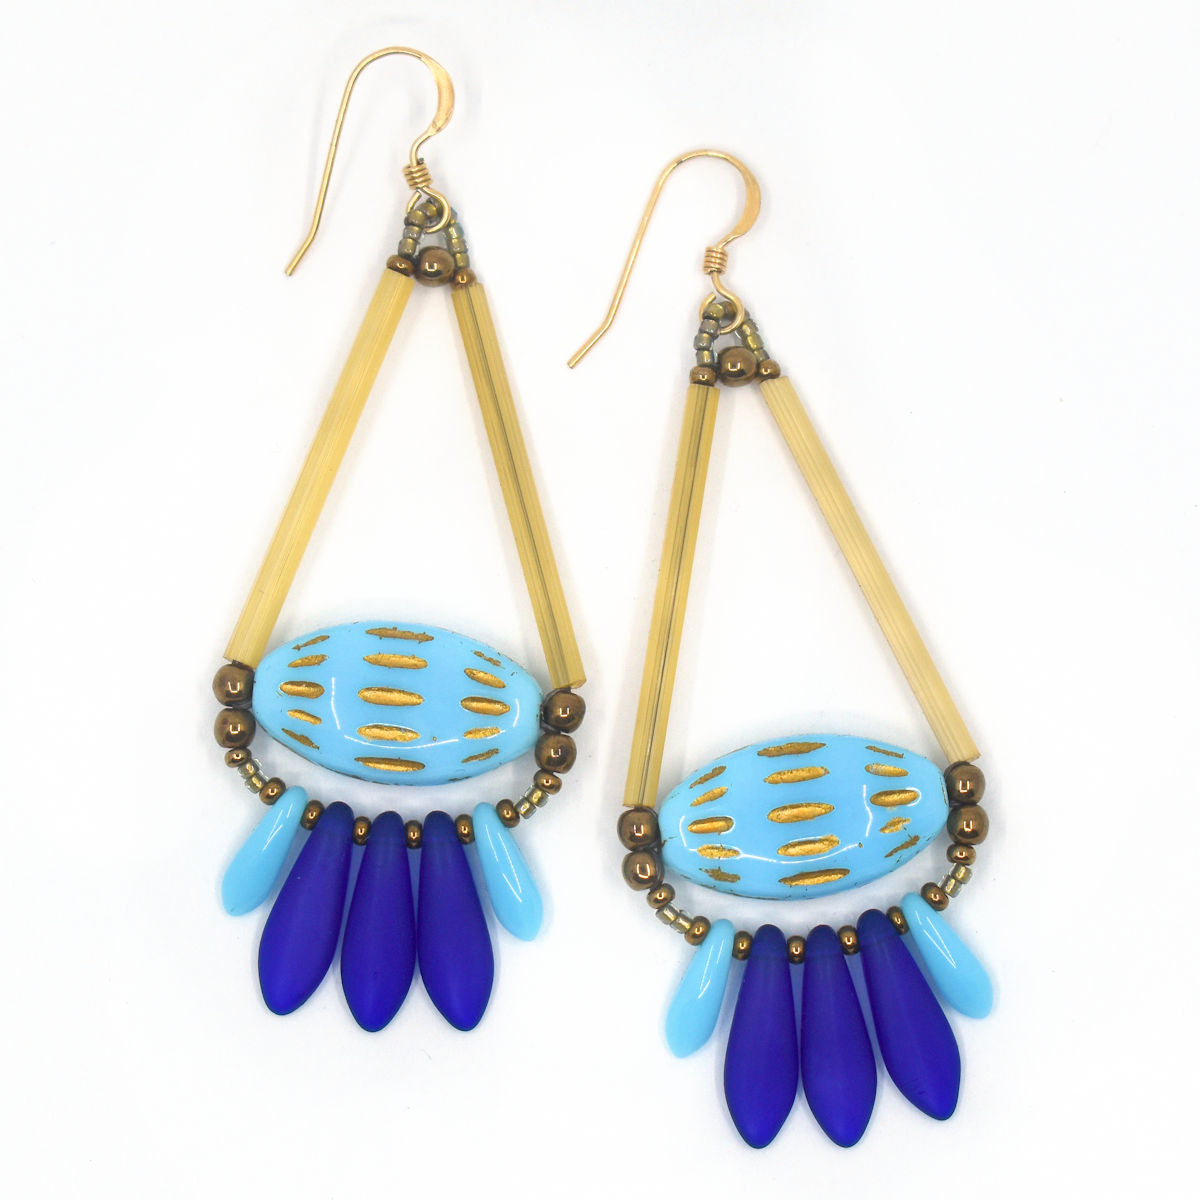 Wide blue earrings lay on a white background. The earrings are a wide teardrop shape with a fringe of matte royal blue and glossy sky blue daggers at the bottom. Across the middle of the earring are elongated light blue ovals with rows of gold embossed dashed lines across them. The triangle sides of the earring’s teardrop shape is formed by long gold tube beads 